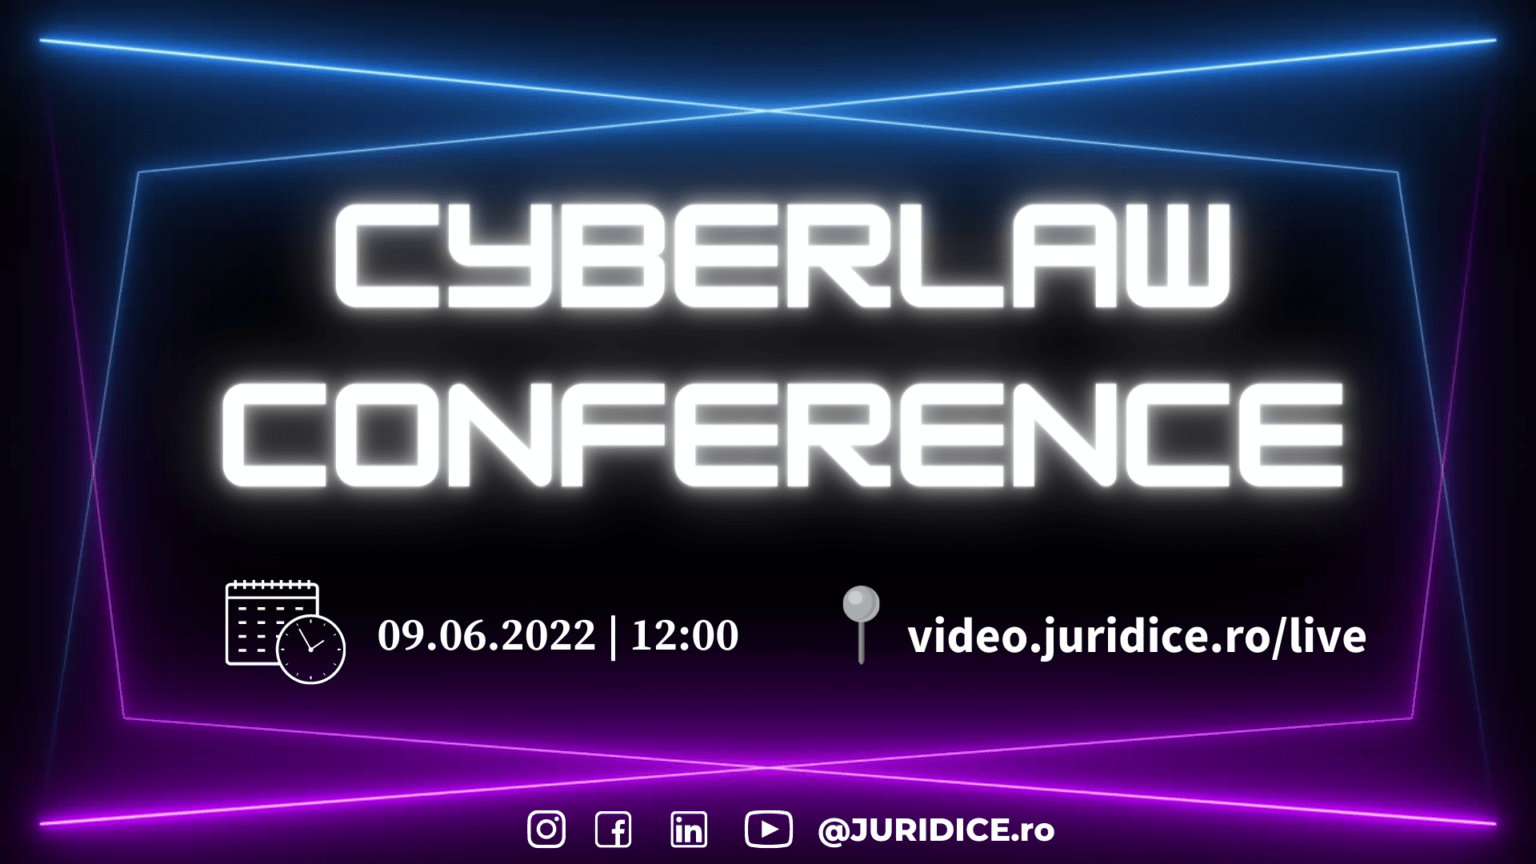 Cyberlaw Conference